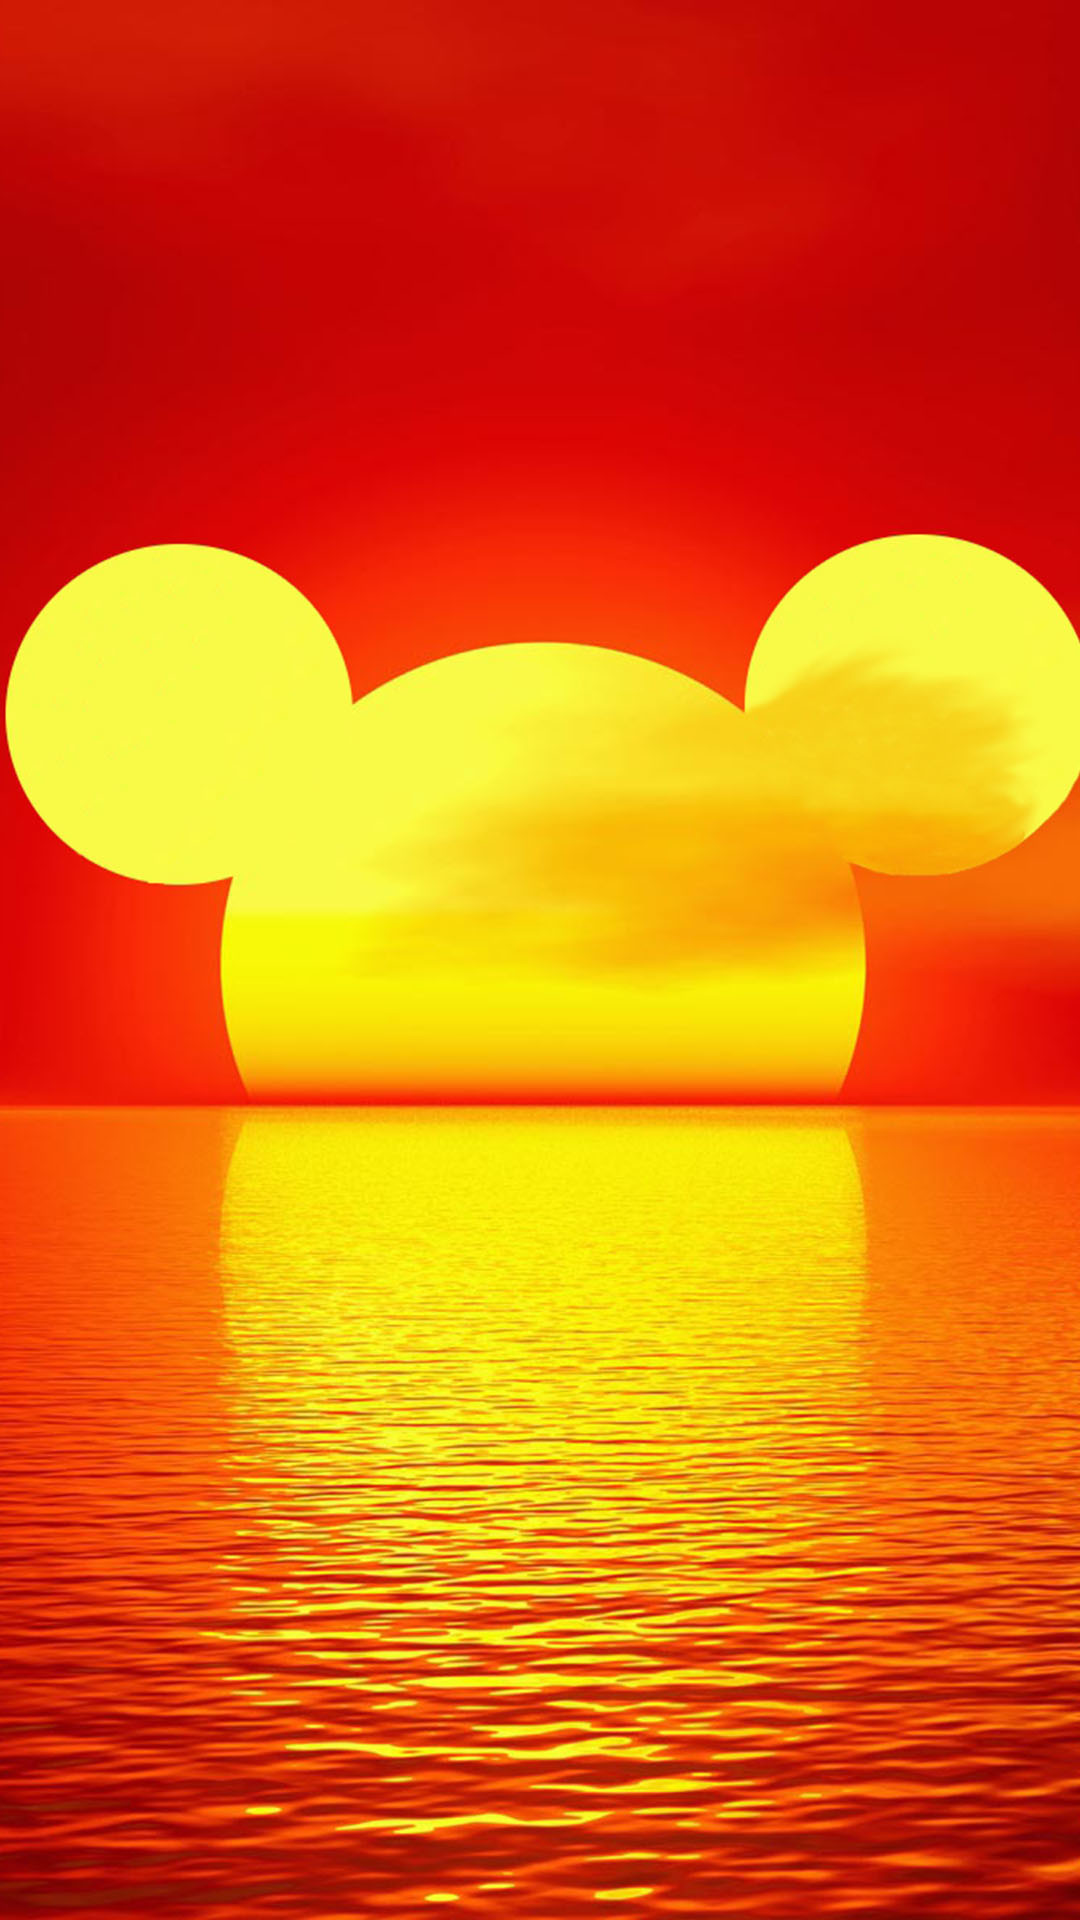 1080x1920 mickey mouse wallpaper iphone 6 plus (4)